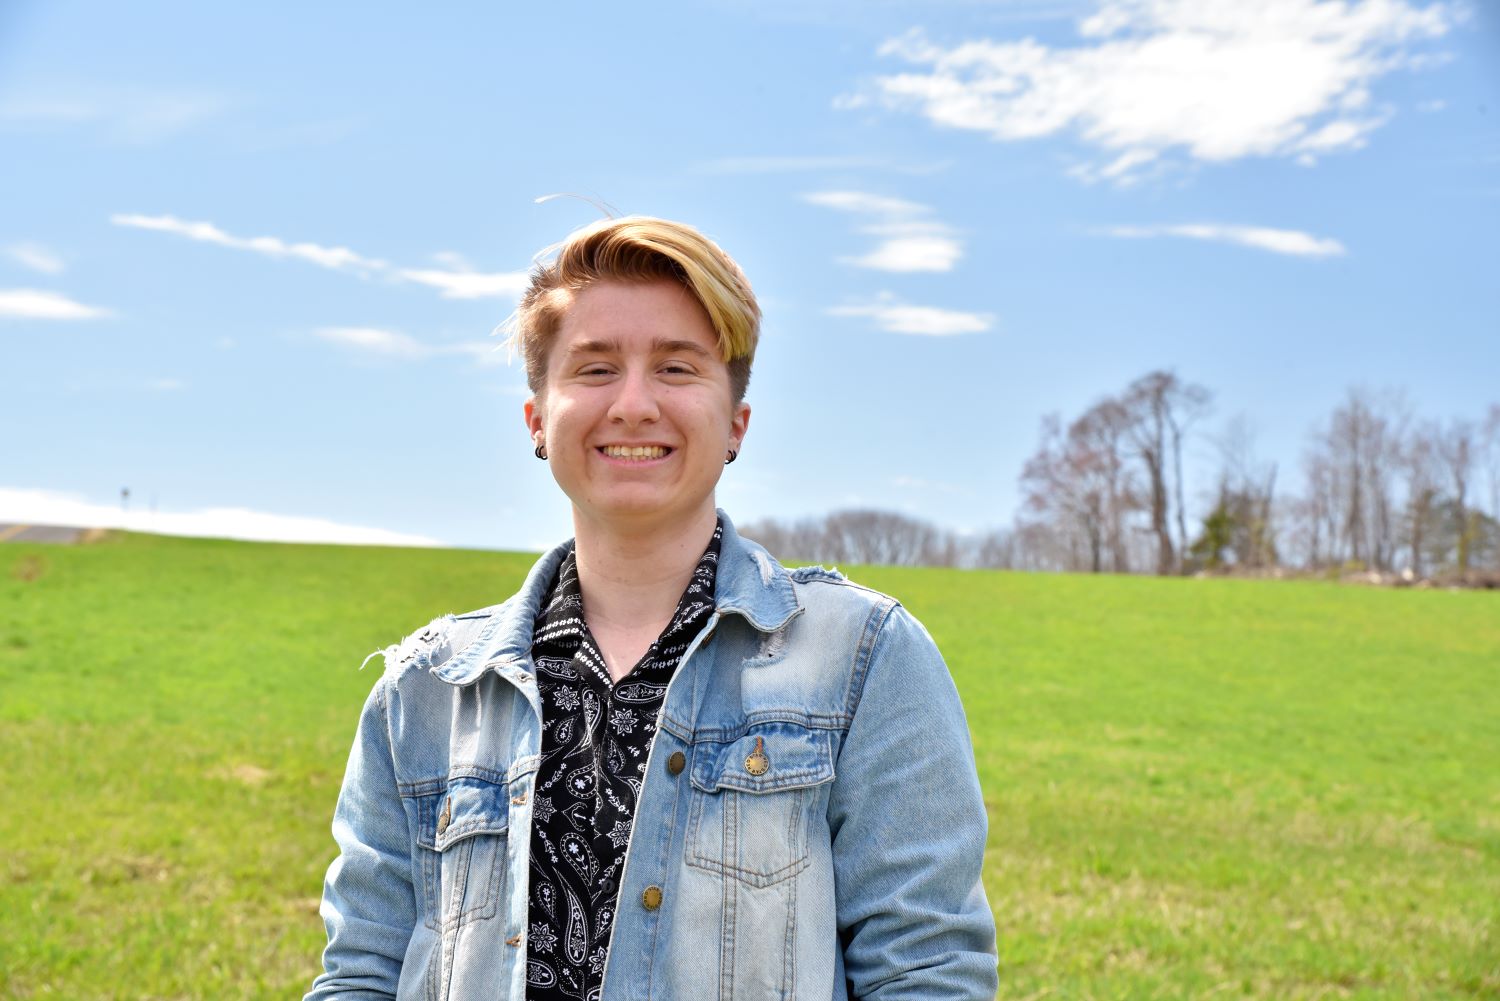 Cameron Deslaurier ‘23 (CAHNR), a major in natural resources in the Department of Natural Resources and the Environment in the College of Agriculture, Health and Natural Resources, poses for a portrait for Commencement 2023 on Horsebarn Hill (HBH). Apr. 12, 2023. (Jason Sheldon/UConn Photo)